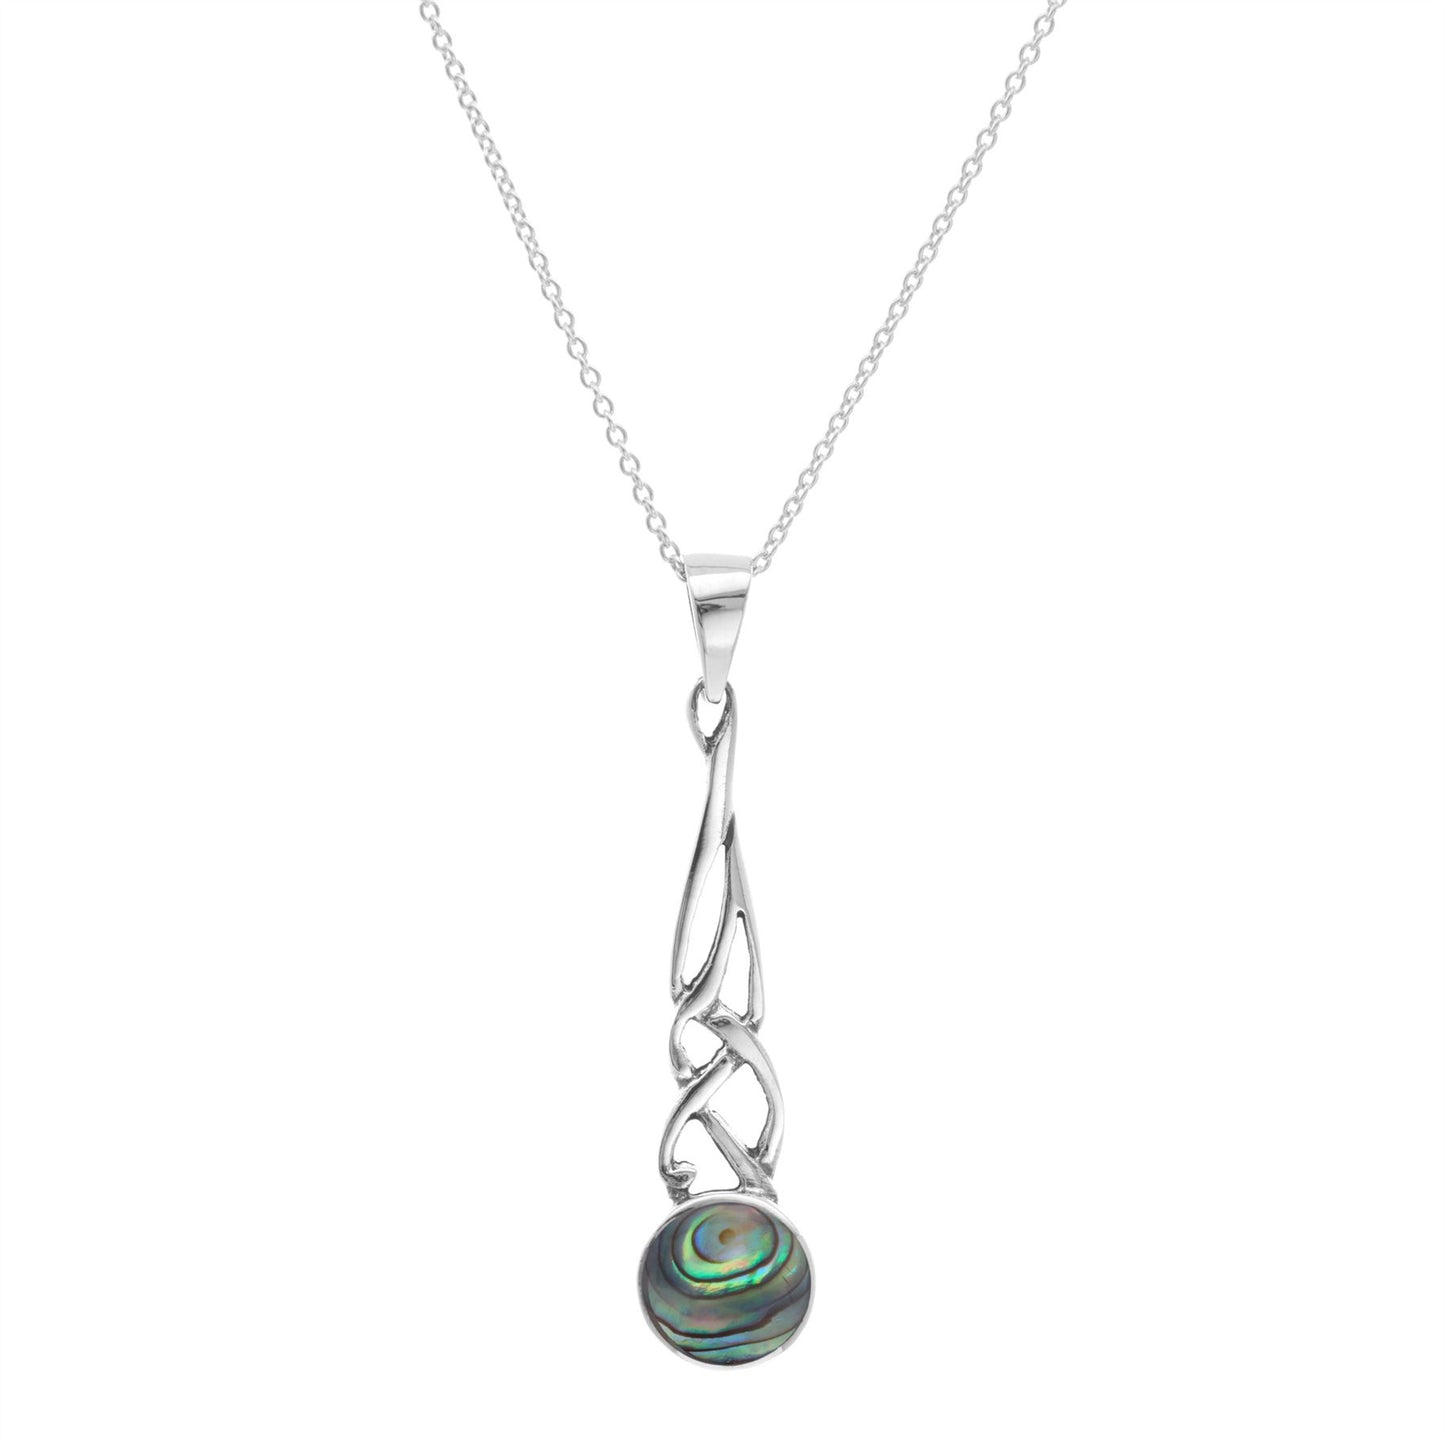 Sterling Silver Long Celtic Knot Pendant Necklace With Abalone Shell